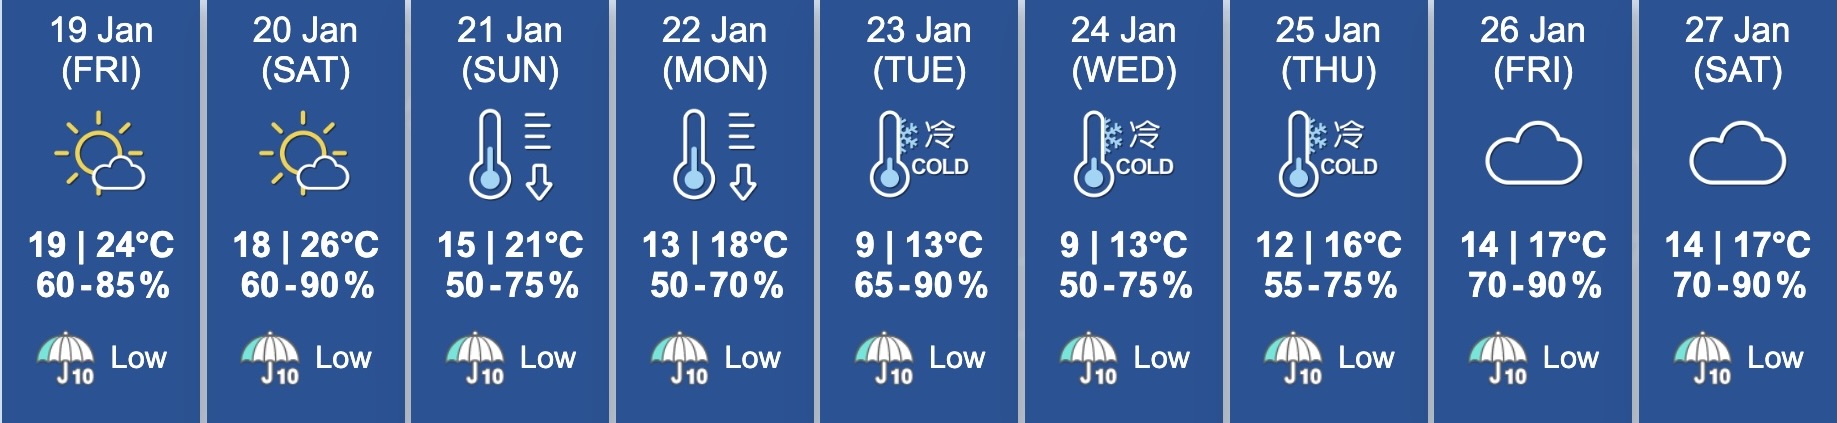 hong kong observatory weather forecast for january 19-january 27, 2024